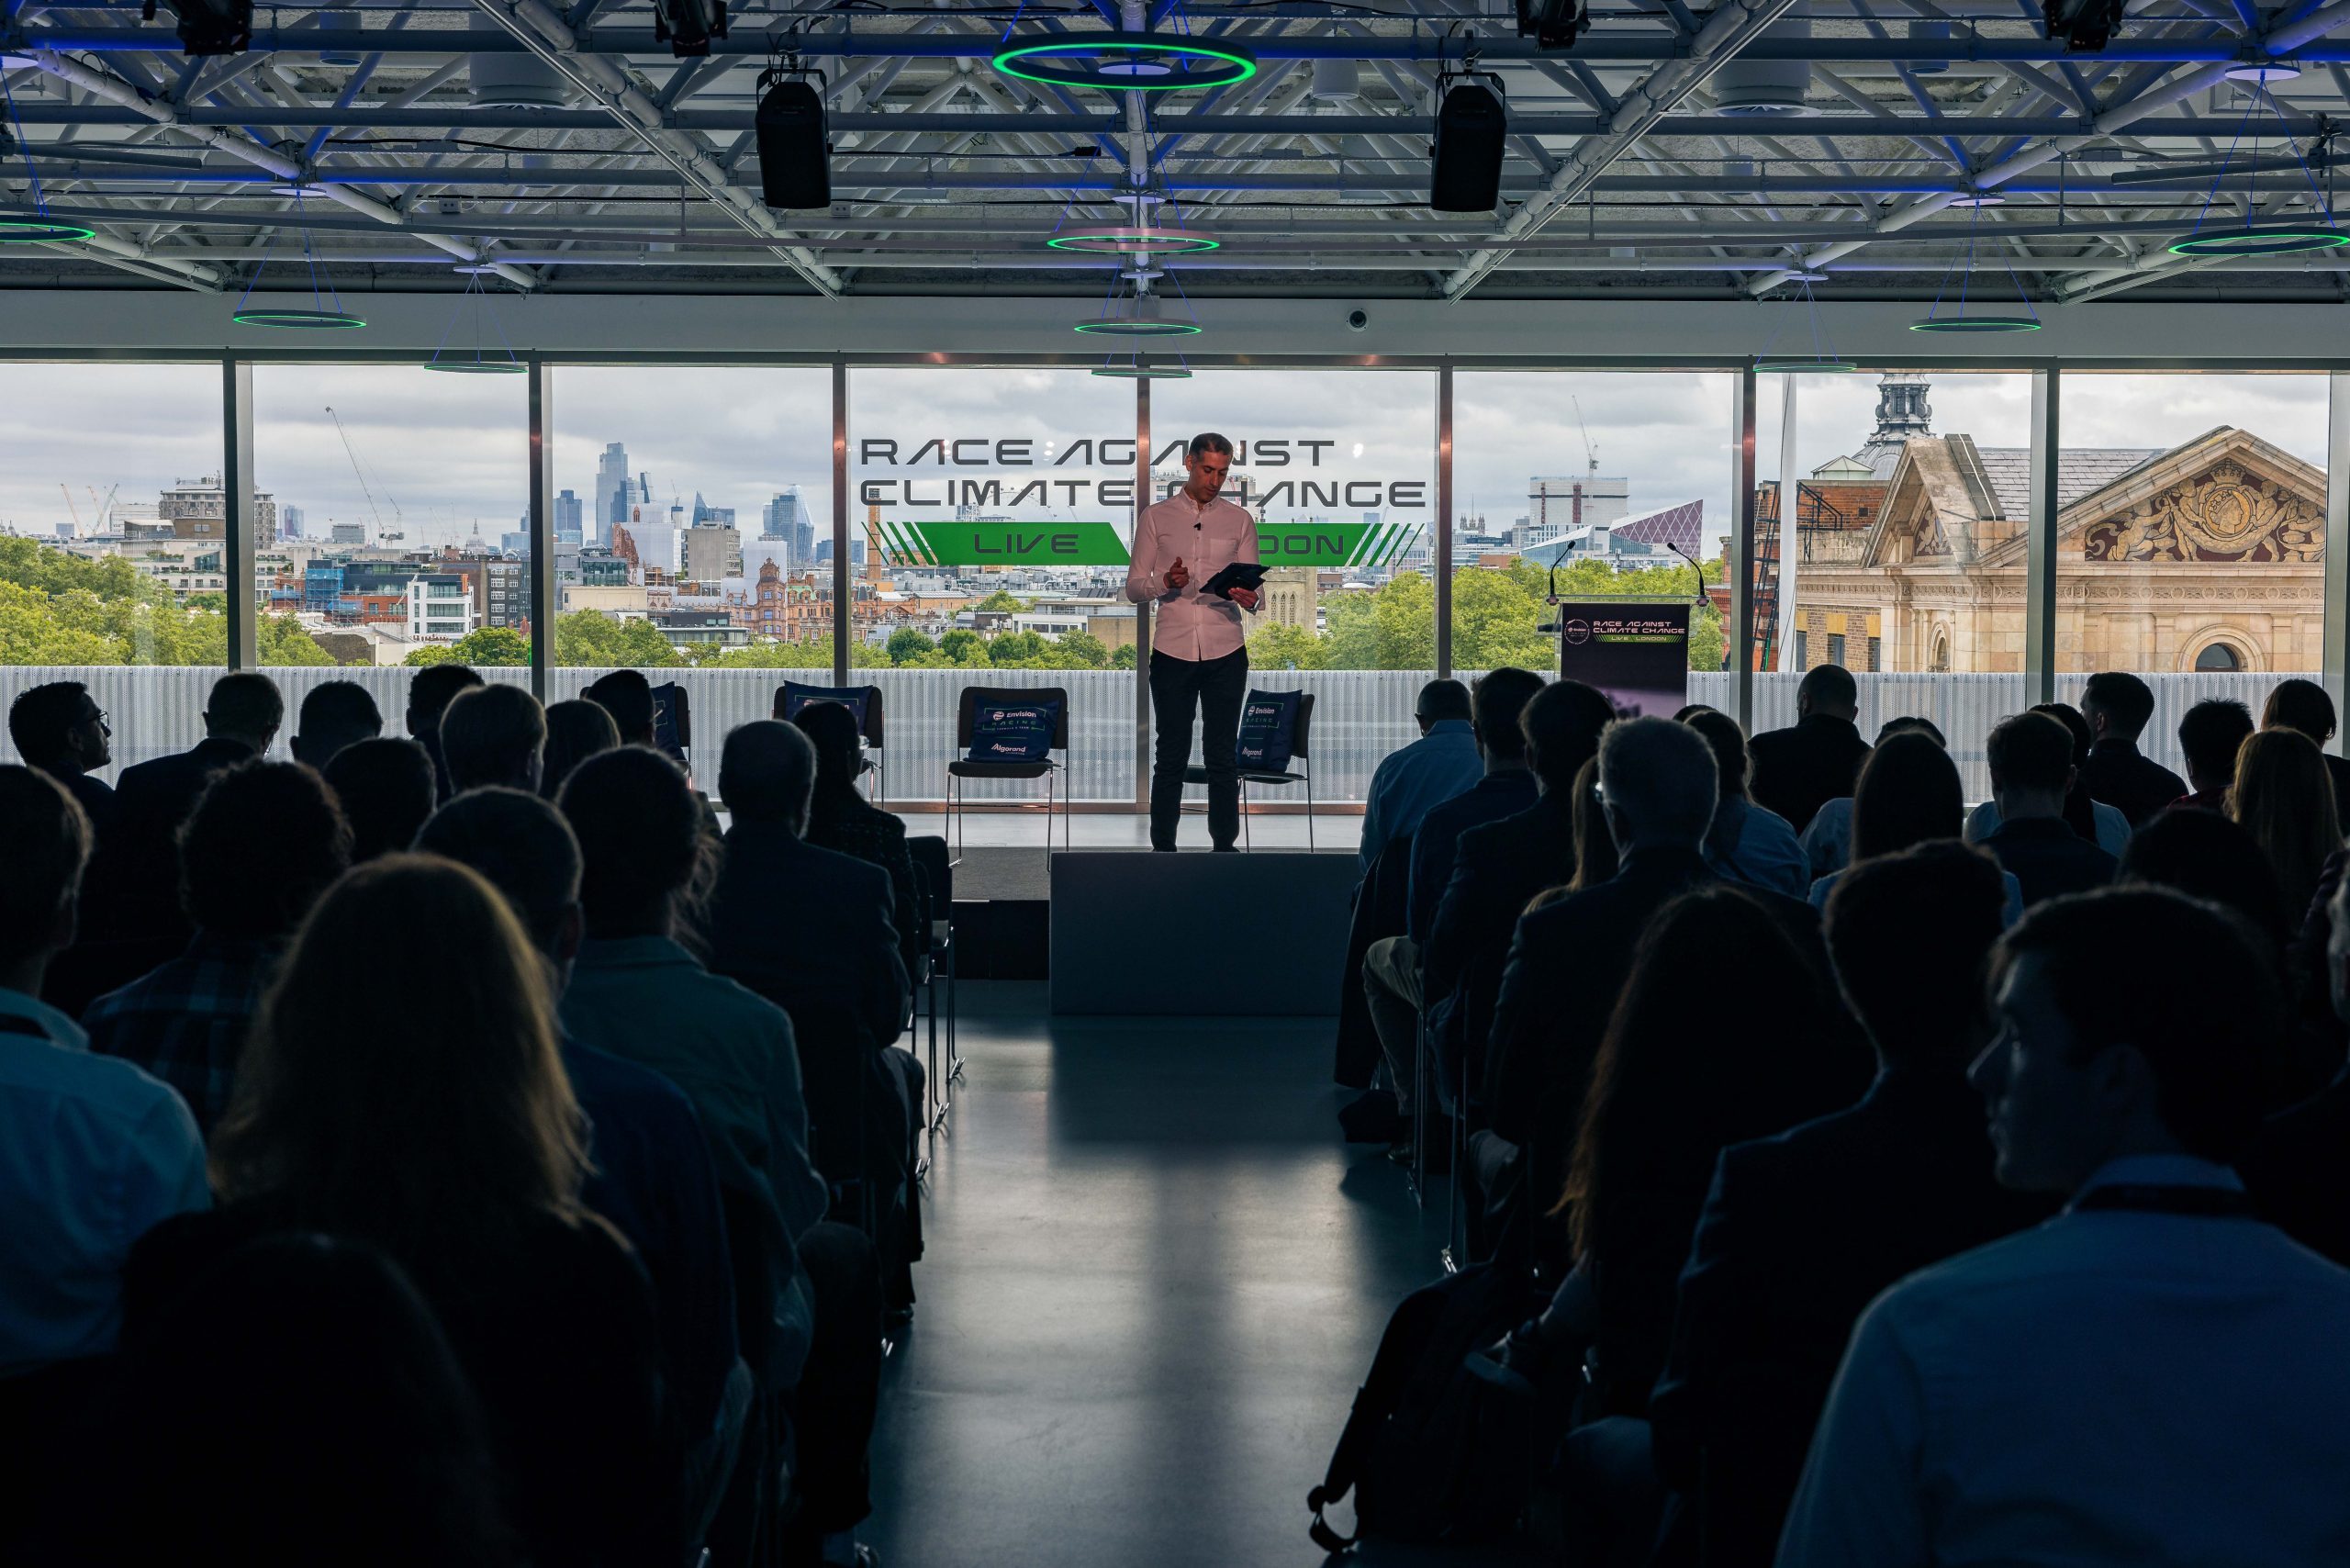 Envision Racing welcome speakers including Dr Jane Goodall, Professor Ed Hawkins and actor Aidan Gallagher to the stage at Race Against Climate Change event